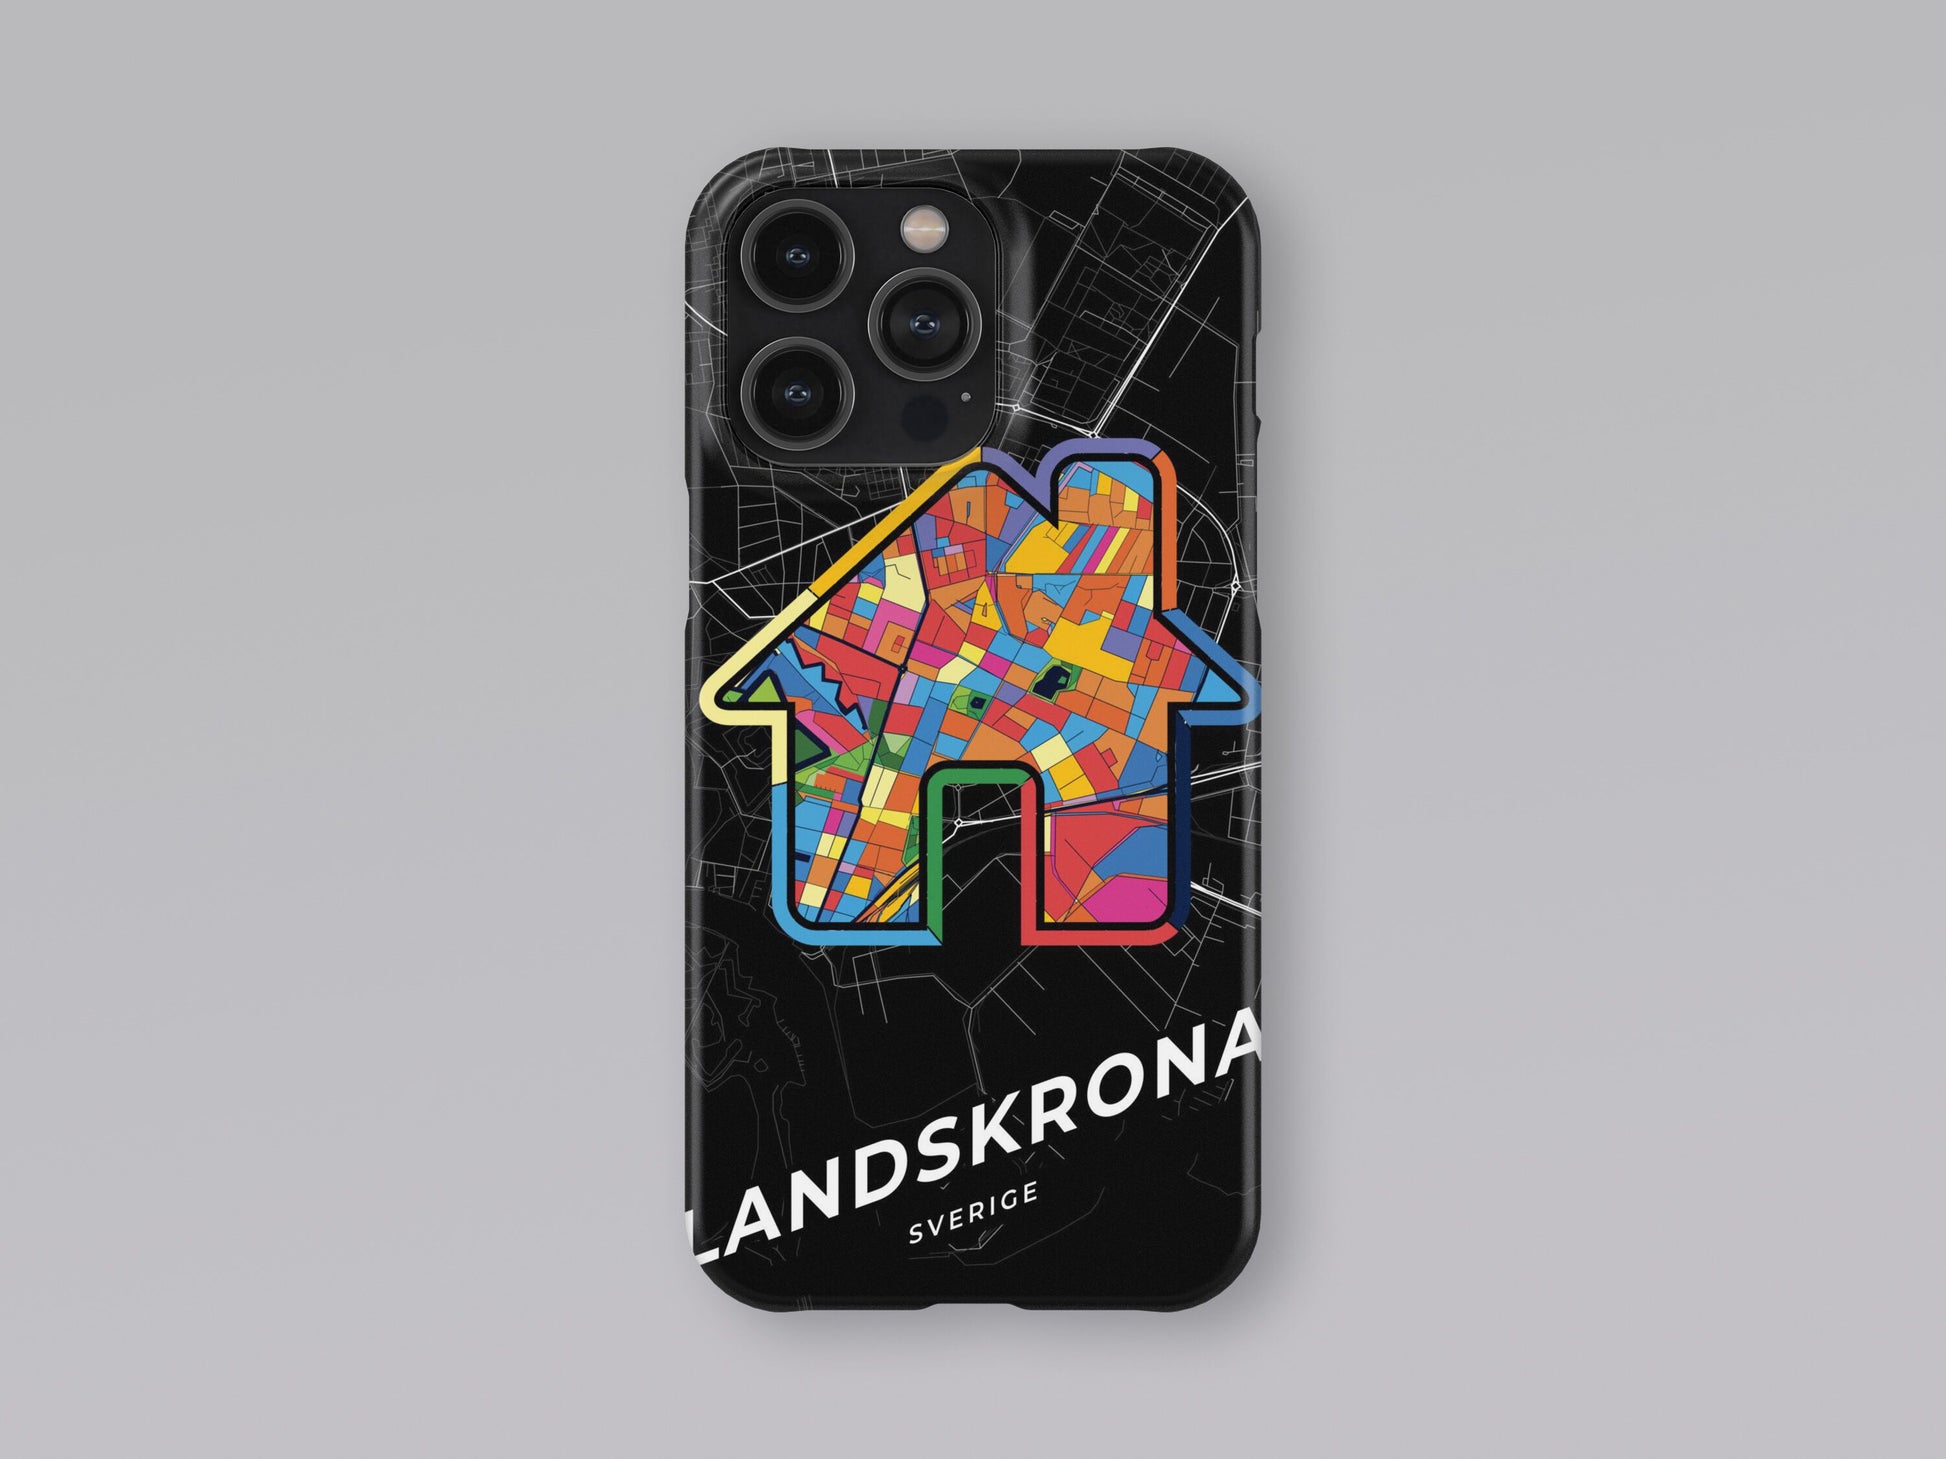 Landskrona Sweden slim phone case with colorful icon. Birthday, wedding or housewarming gift. Couple match cases. 3